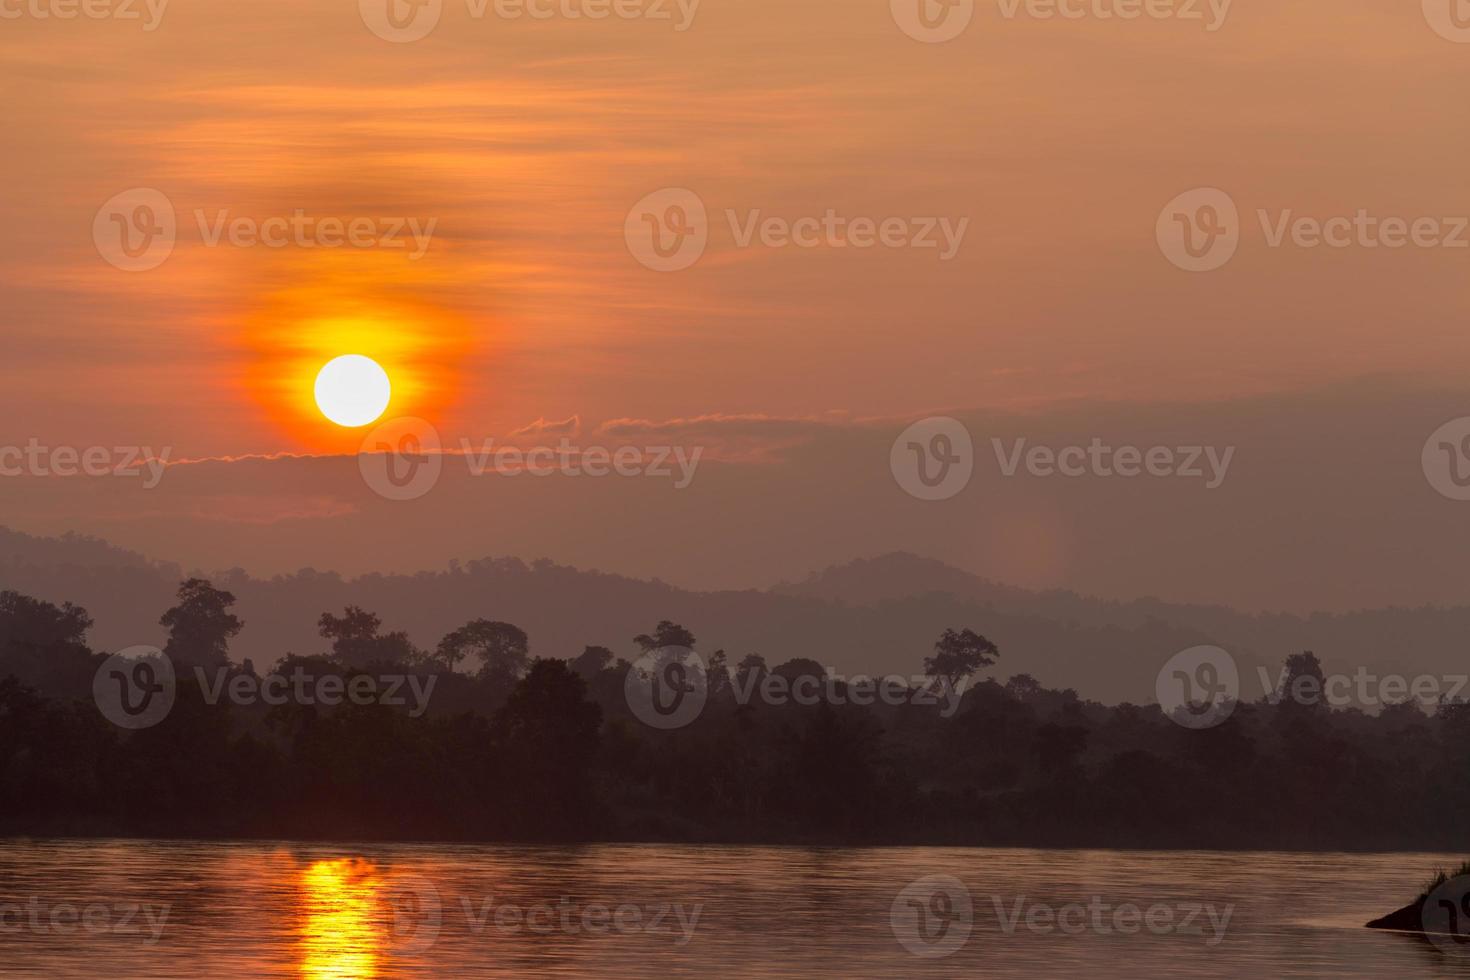 Sunrise at Mekong river between Thai - Laos Beautiful landscape in morning time photo